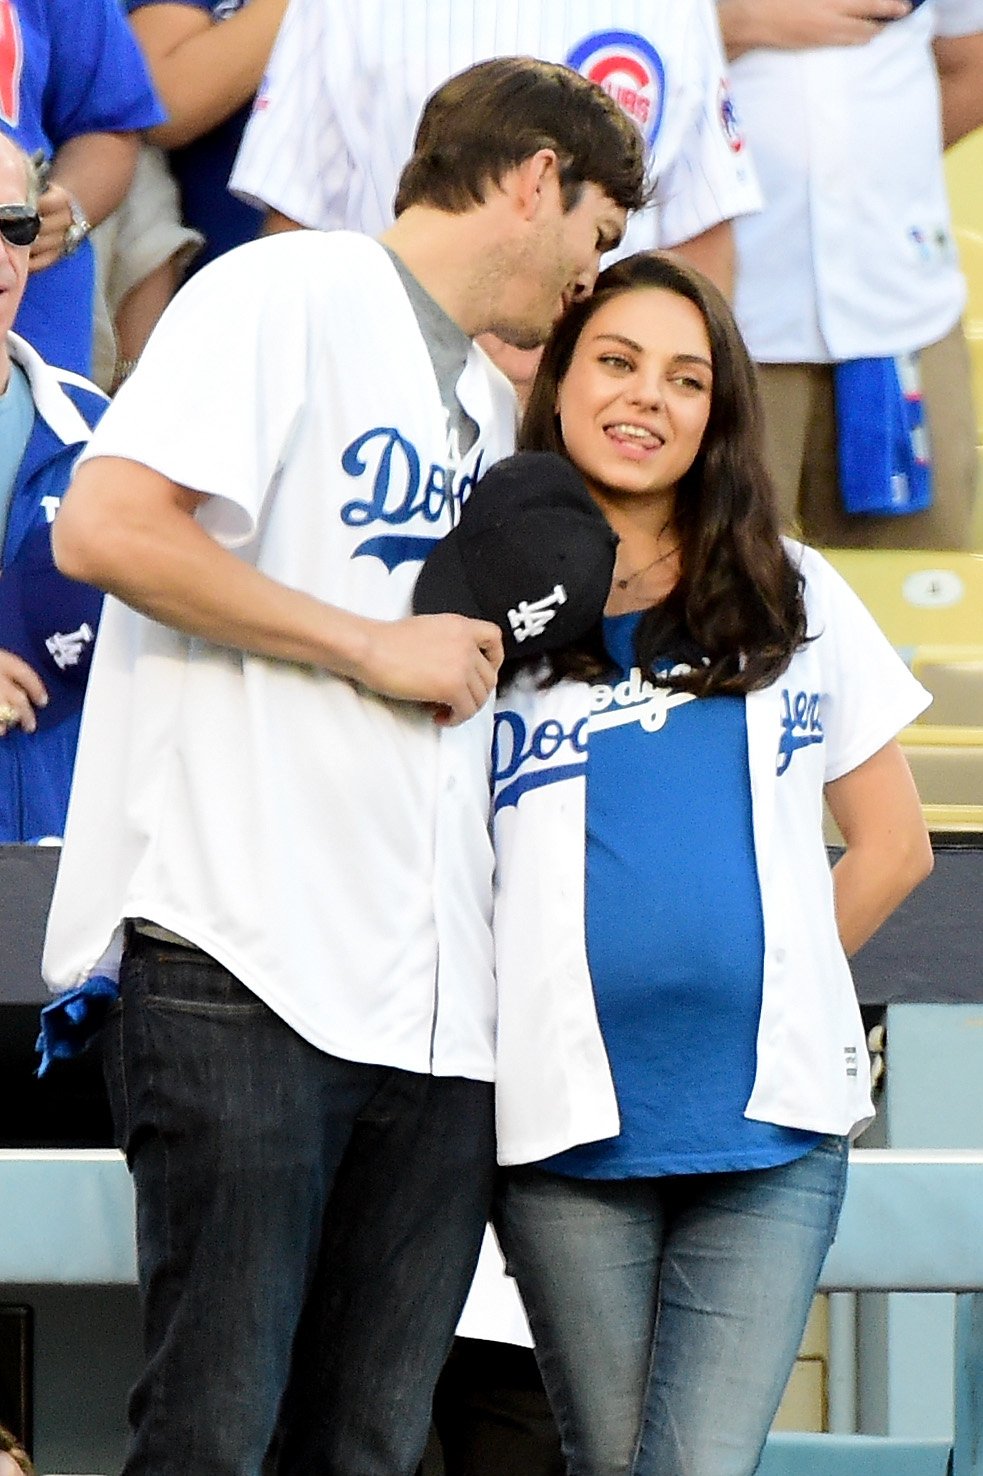 Ashton Kutcher and his wife Mila Kunis on the field at Dodgers Stadium on October 19, 2016, in Los Angeles, California | Source: Getty Images